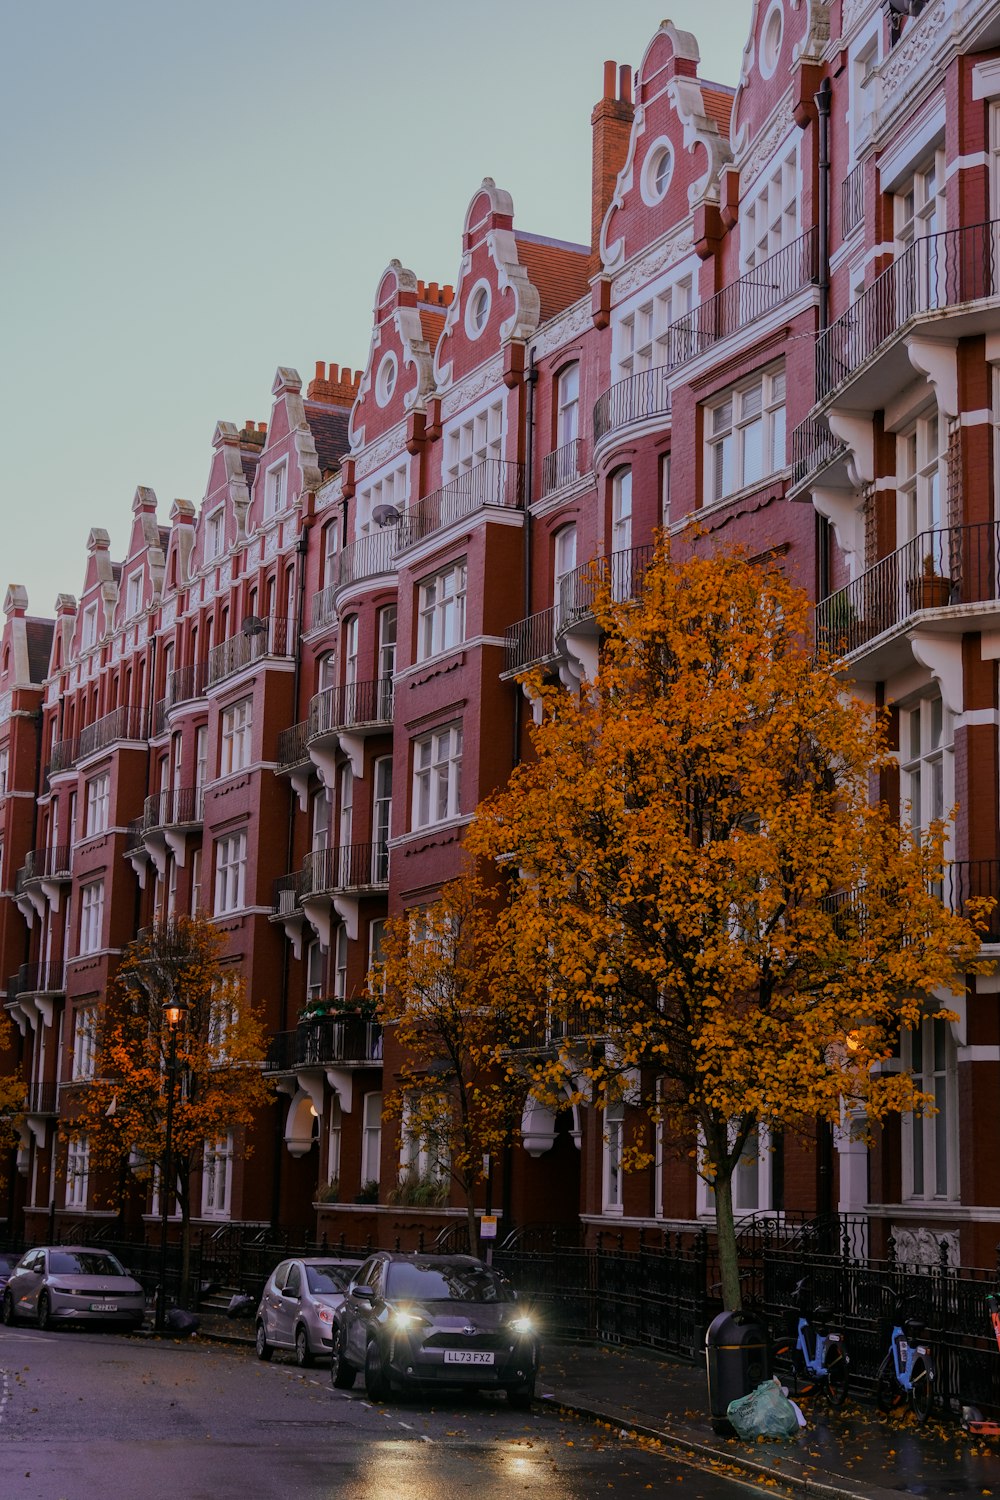 a row of red brick buildings on a city street